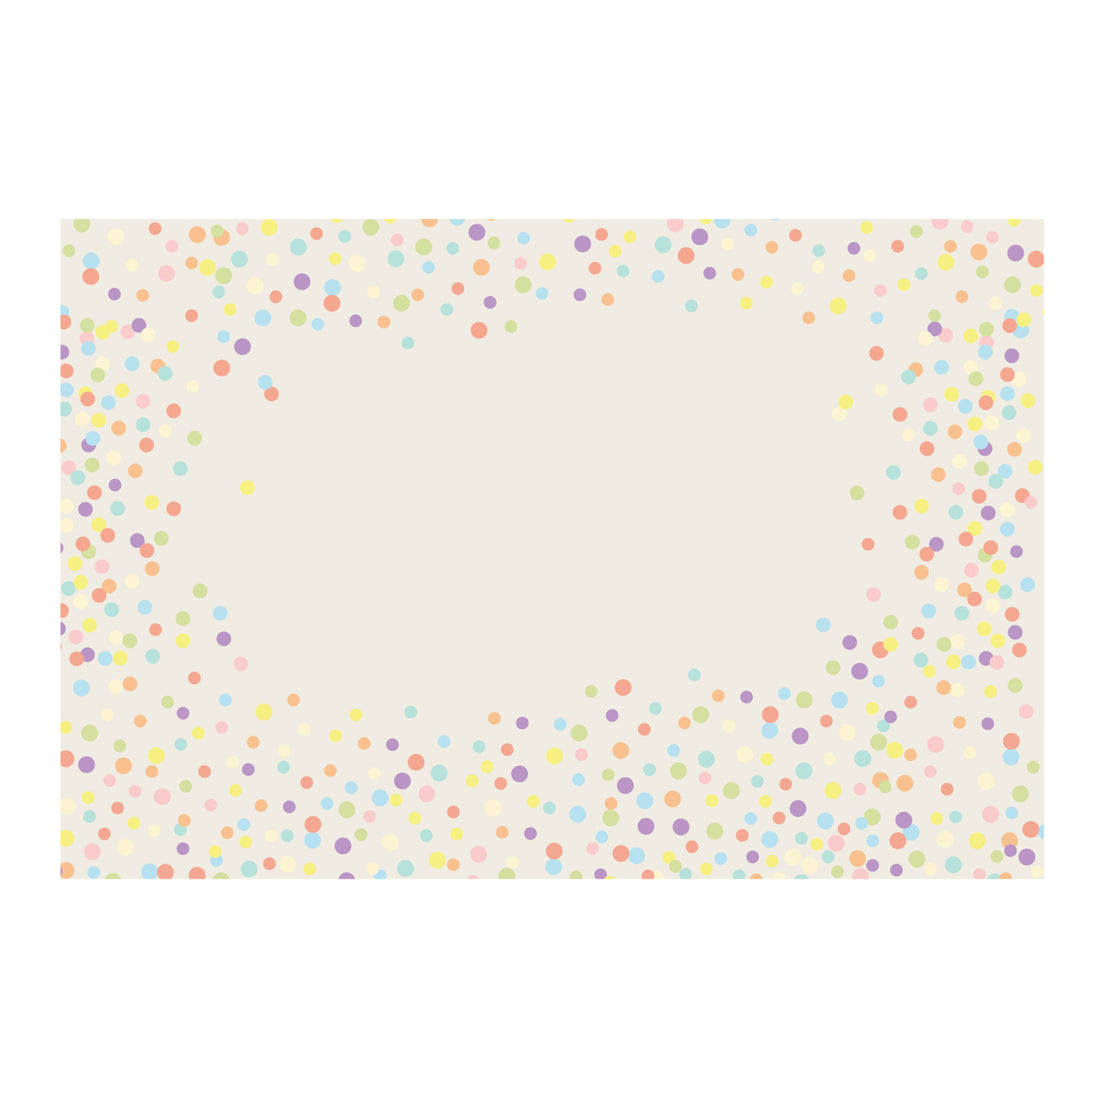 Paper placemat with multi color confetti printed around perimeter of placemat.